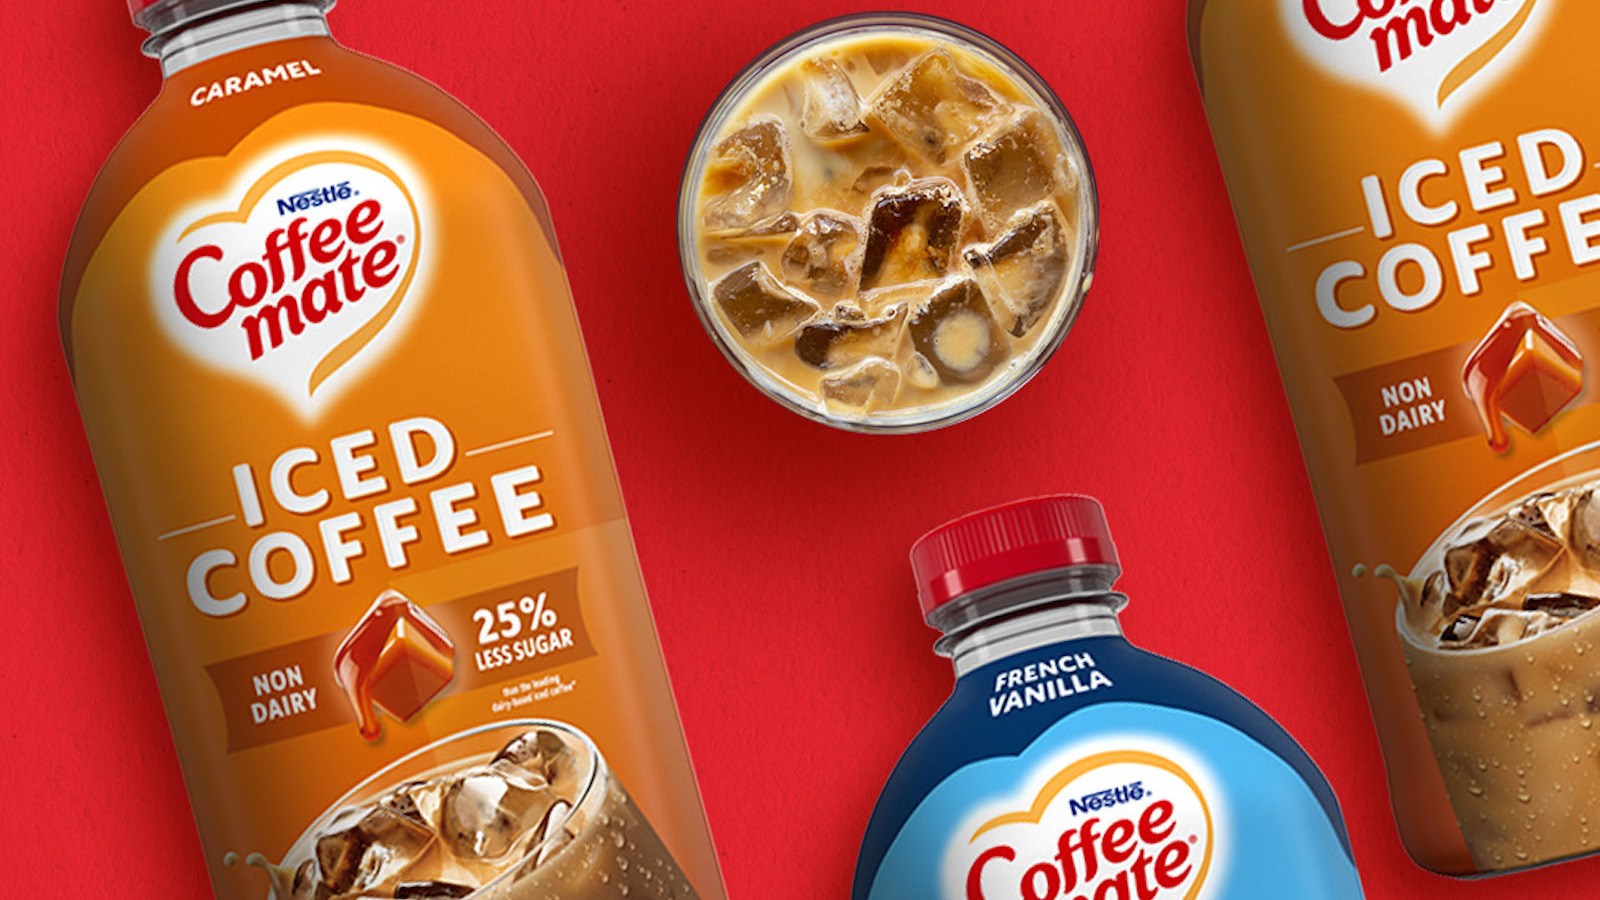 https://www.foodrepublic.com/img/gallery/coffee-mate-releases-non-dairy-ready-to-drink-iced-coffee-bottles/l-intro-1698092372.jpg